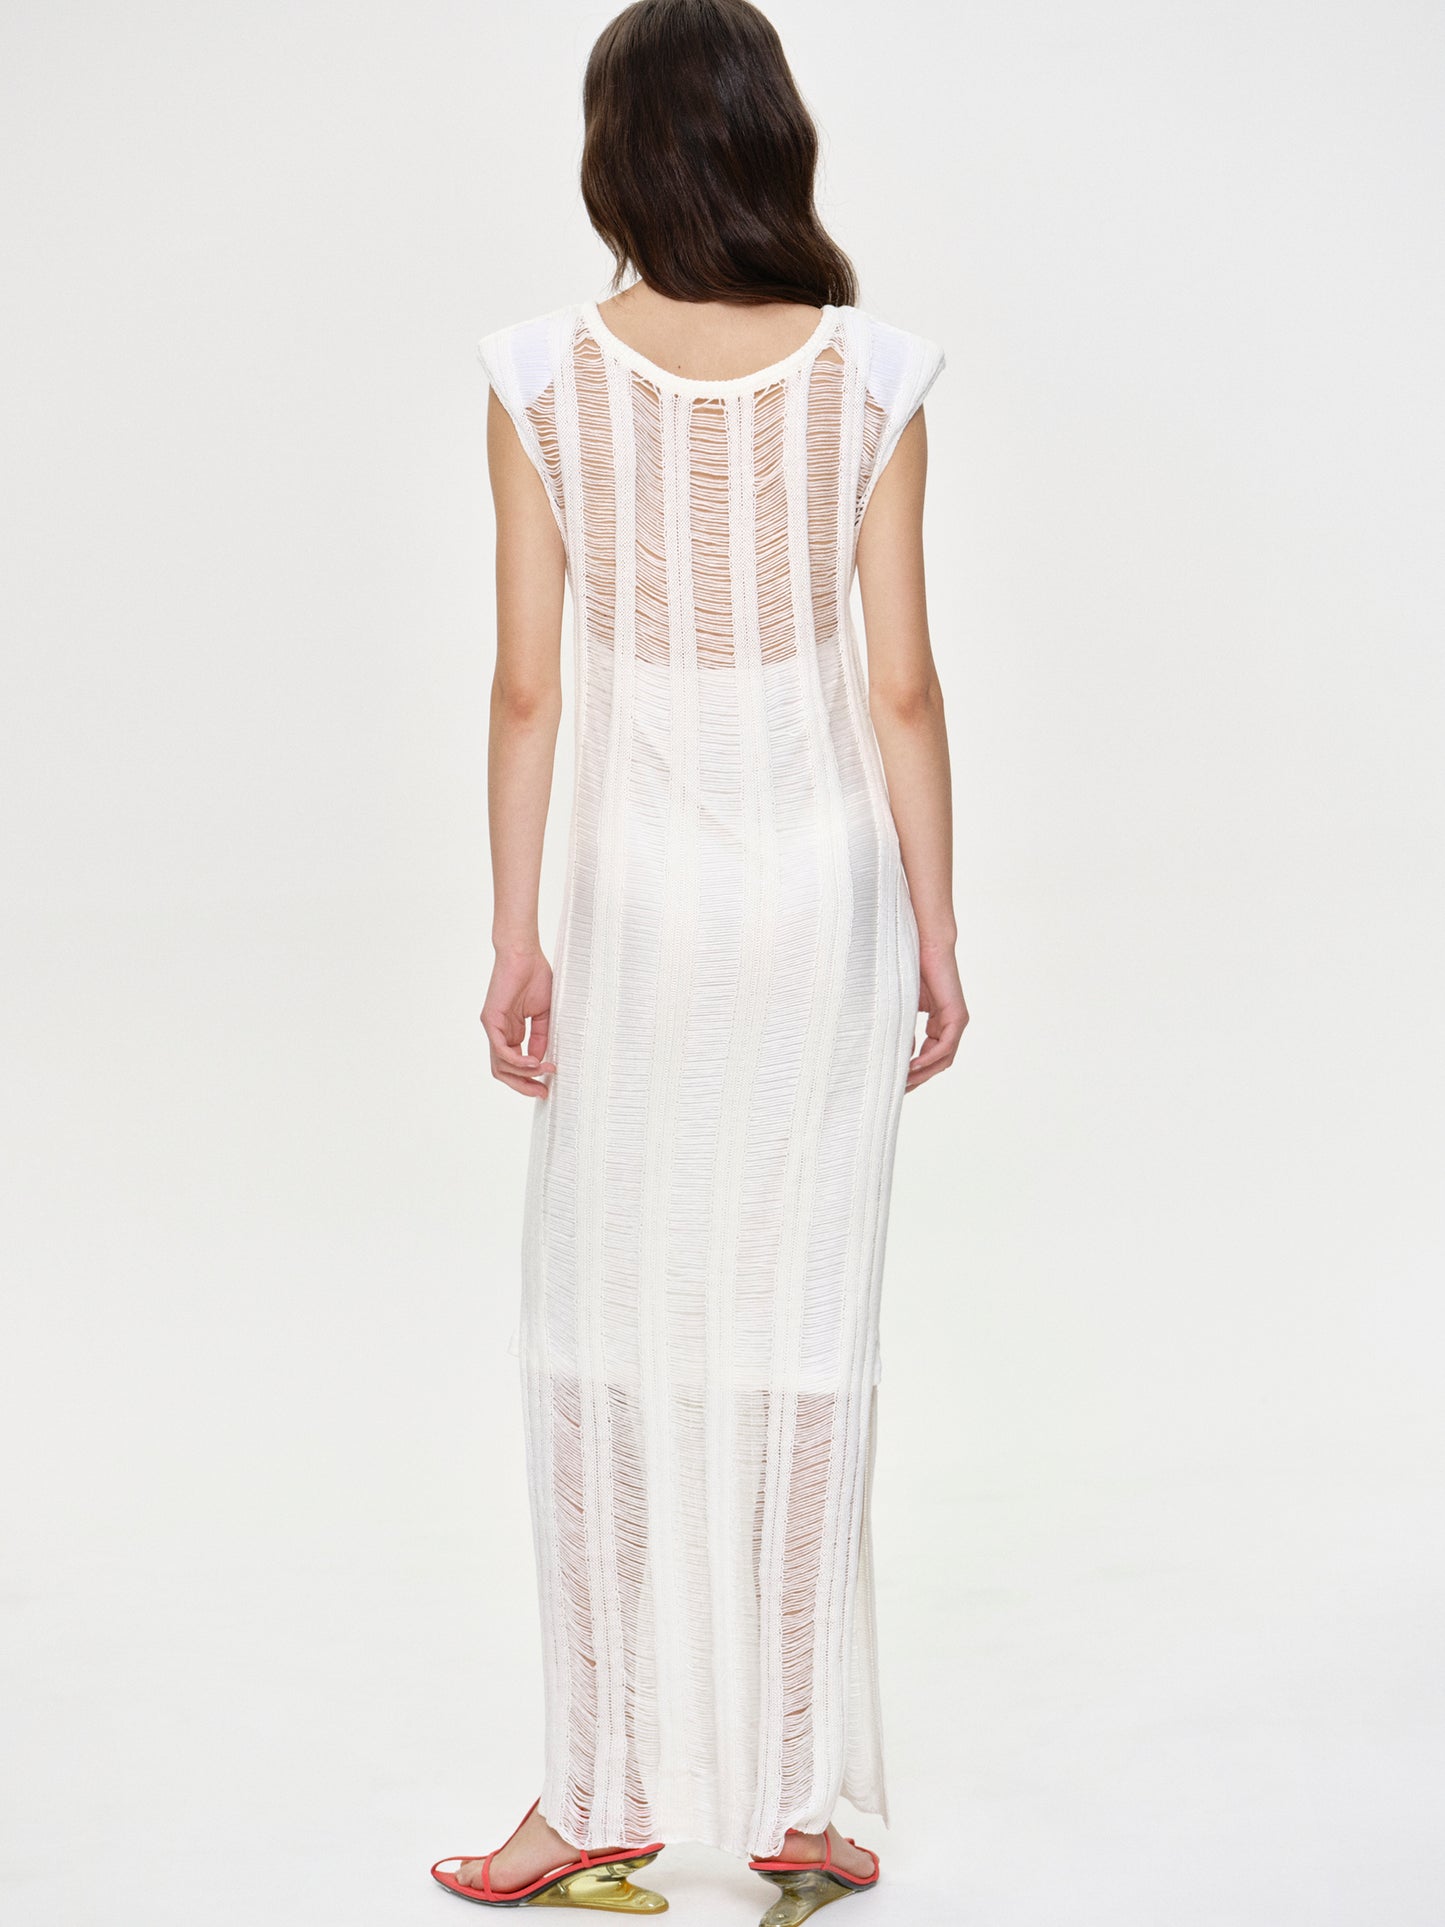 Pad Shoulder Netted Dress, White